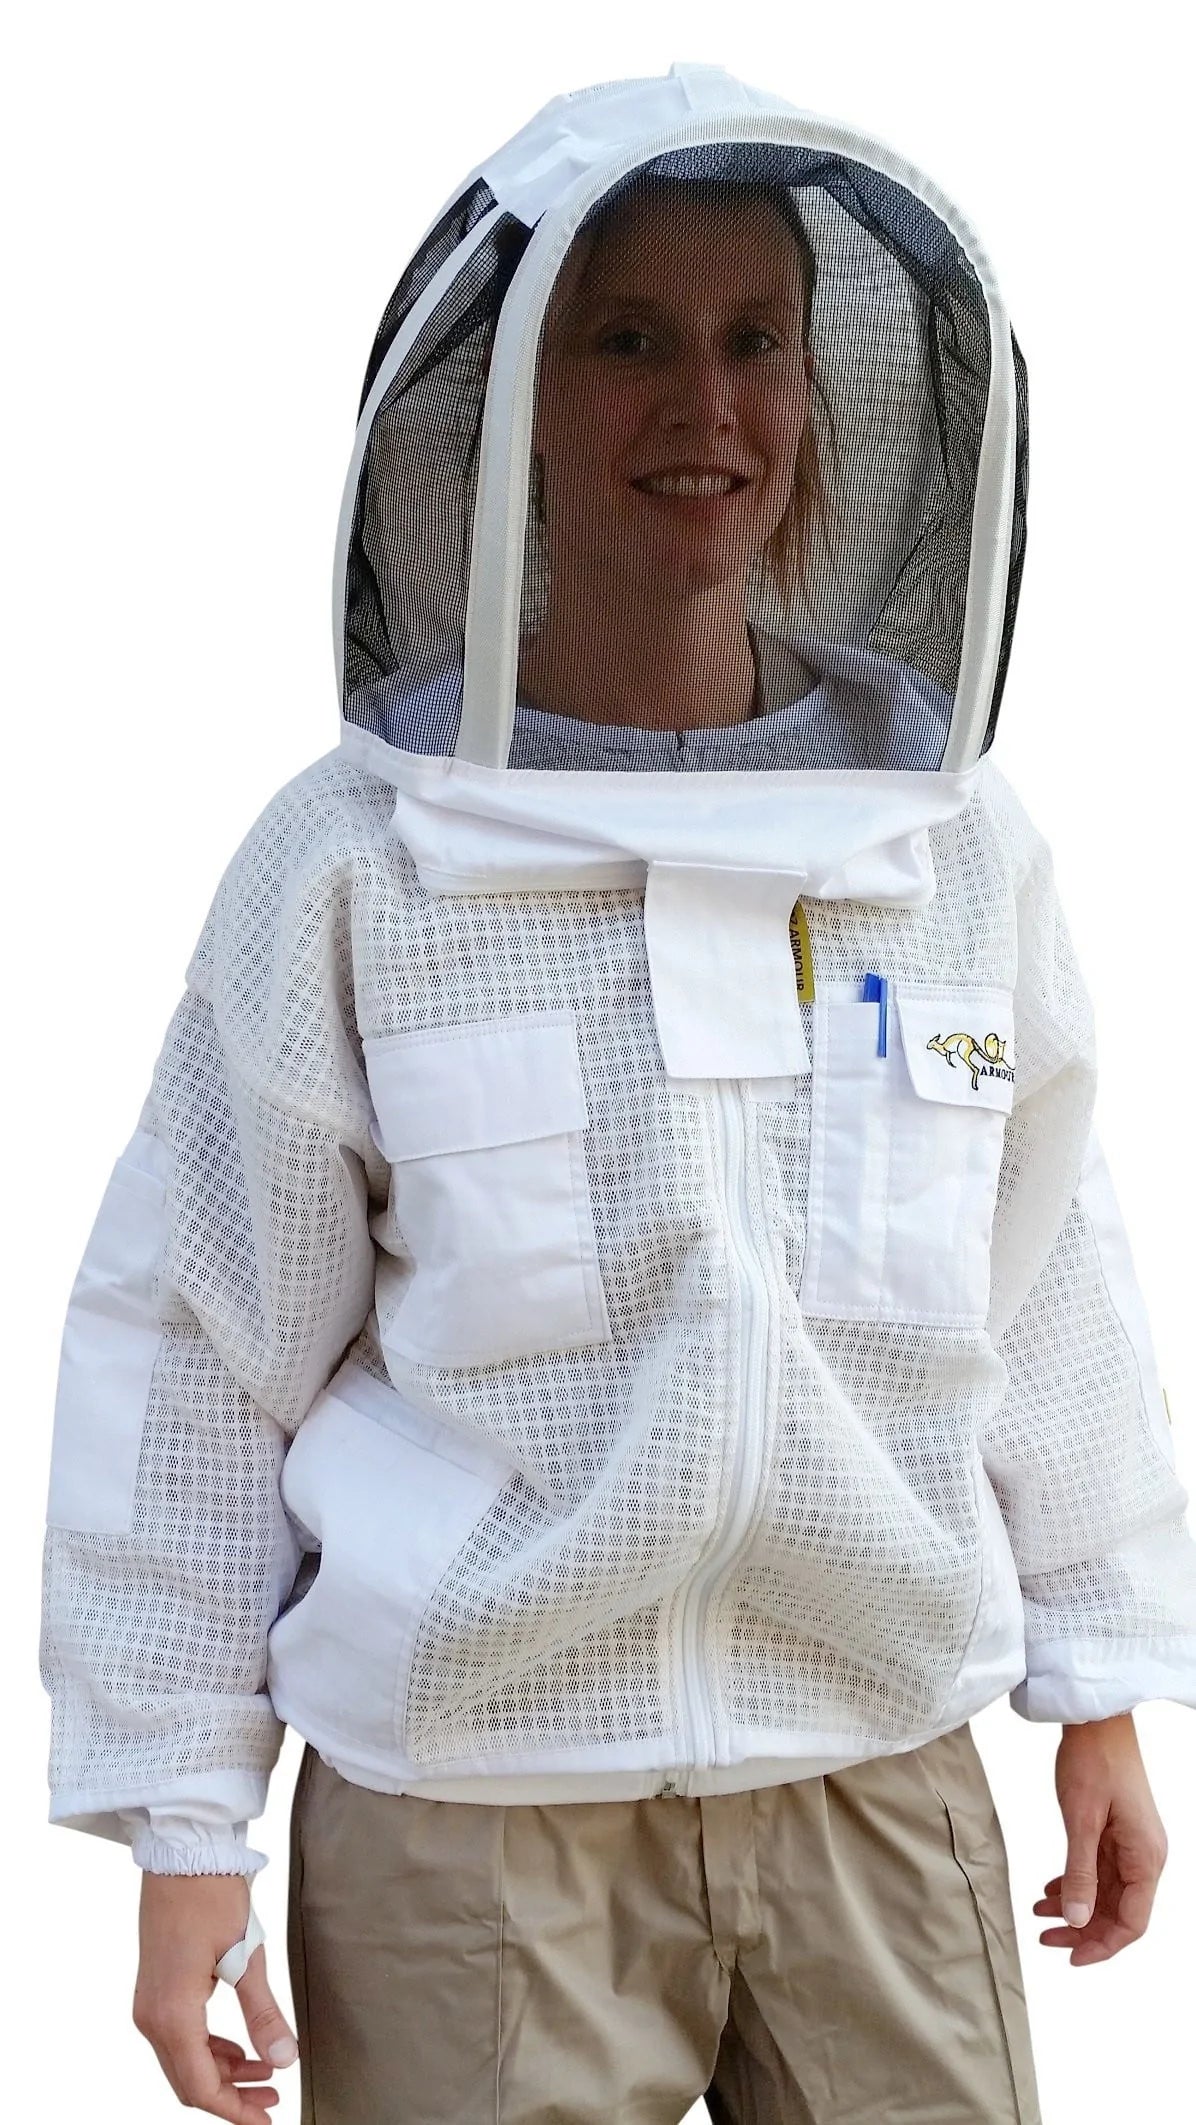 OZ ARMOUR 3 LAYER MESH VENTILATED BEEKEEPING JACKET WITH FENCING VEIL